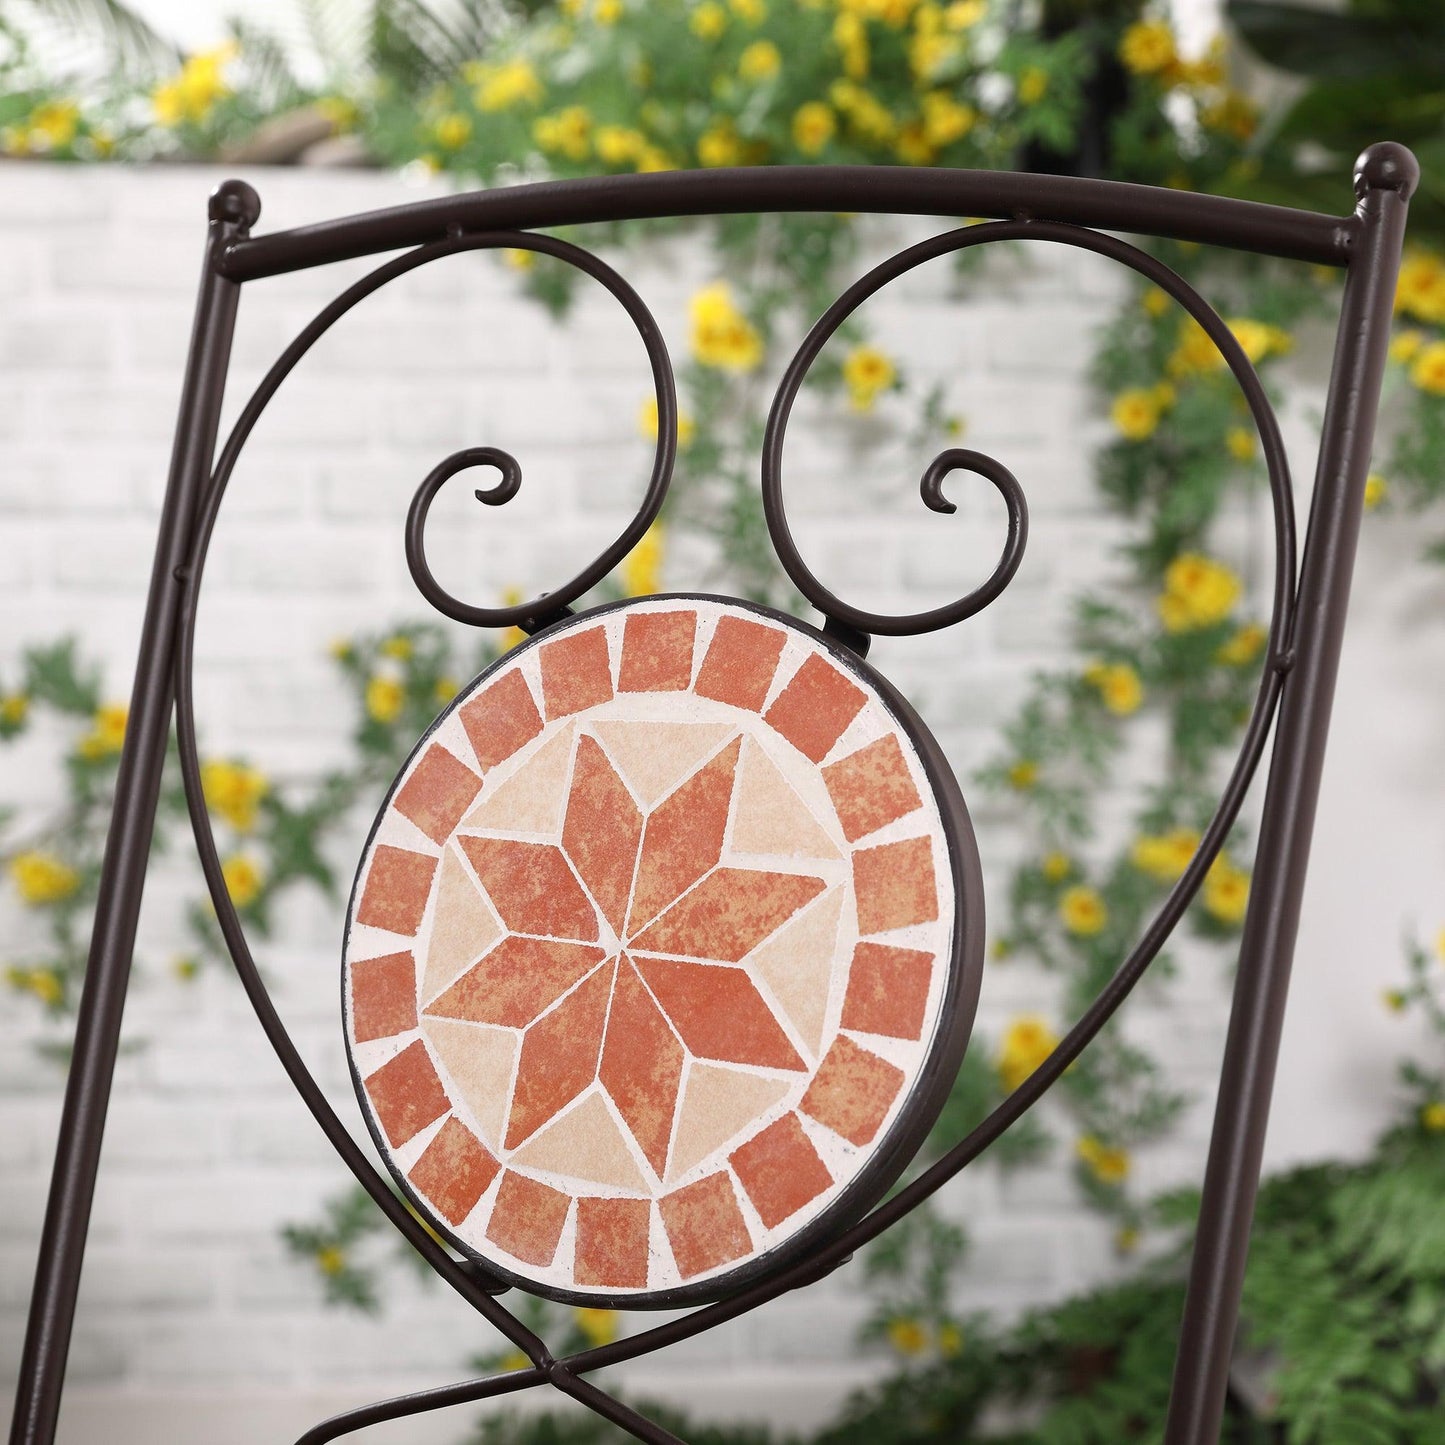 Outsunny Bistro Set: Folding Chairs & Round Table - ALL4U RETAILER LTD